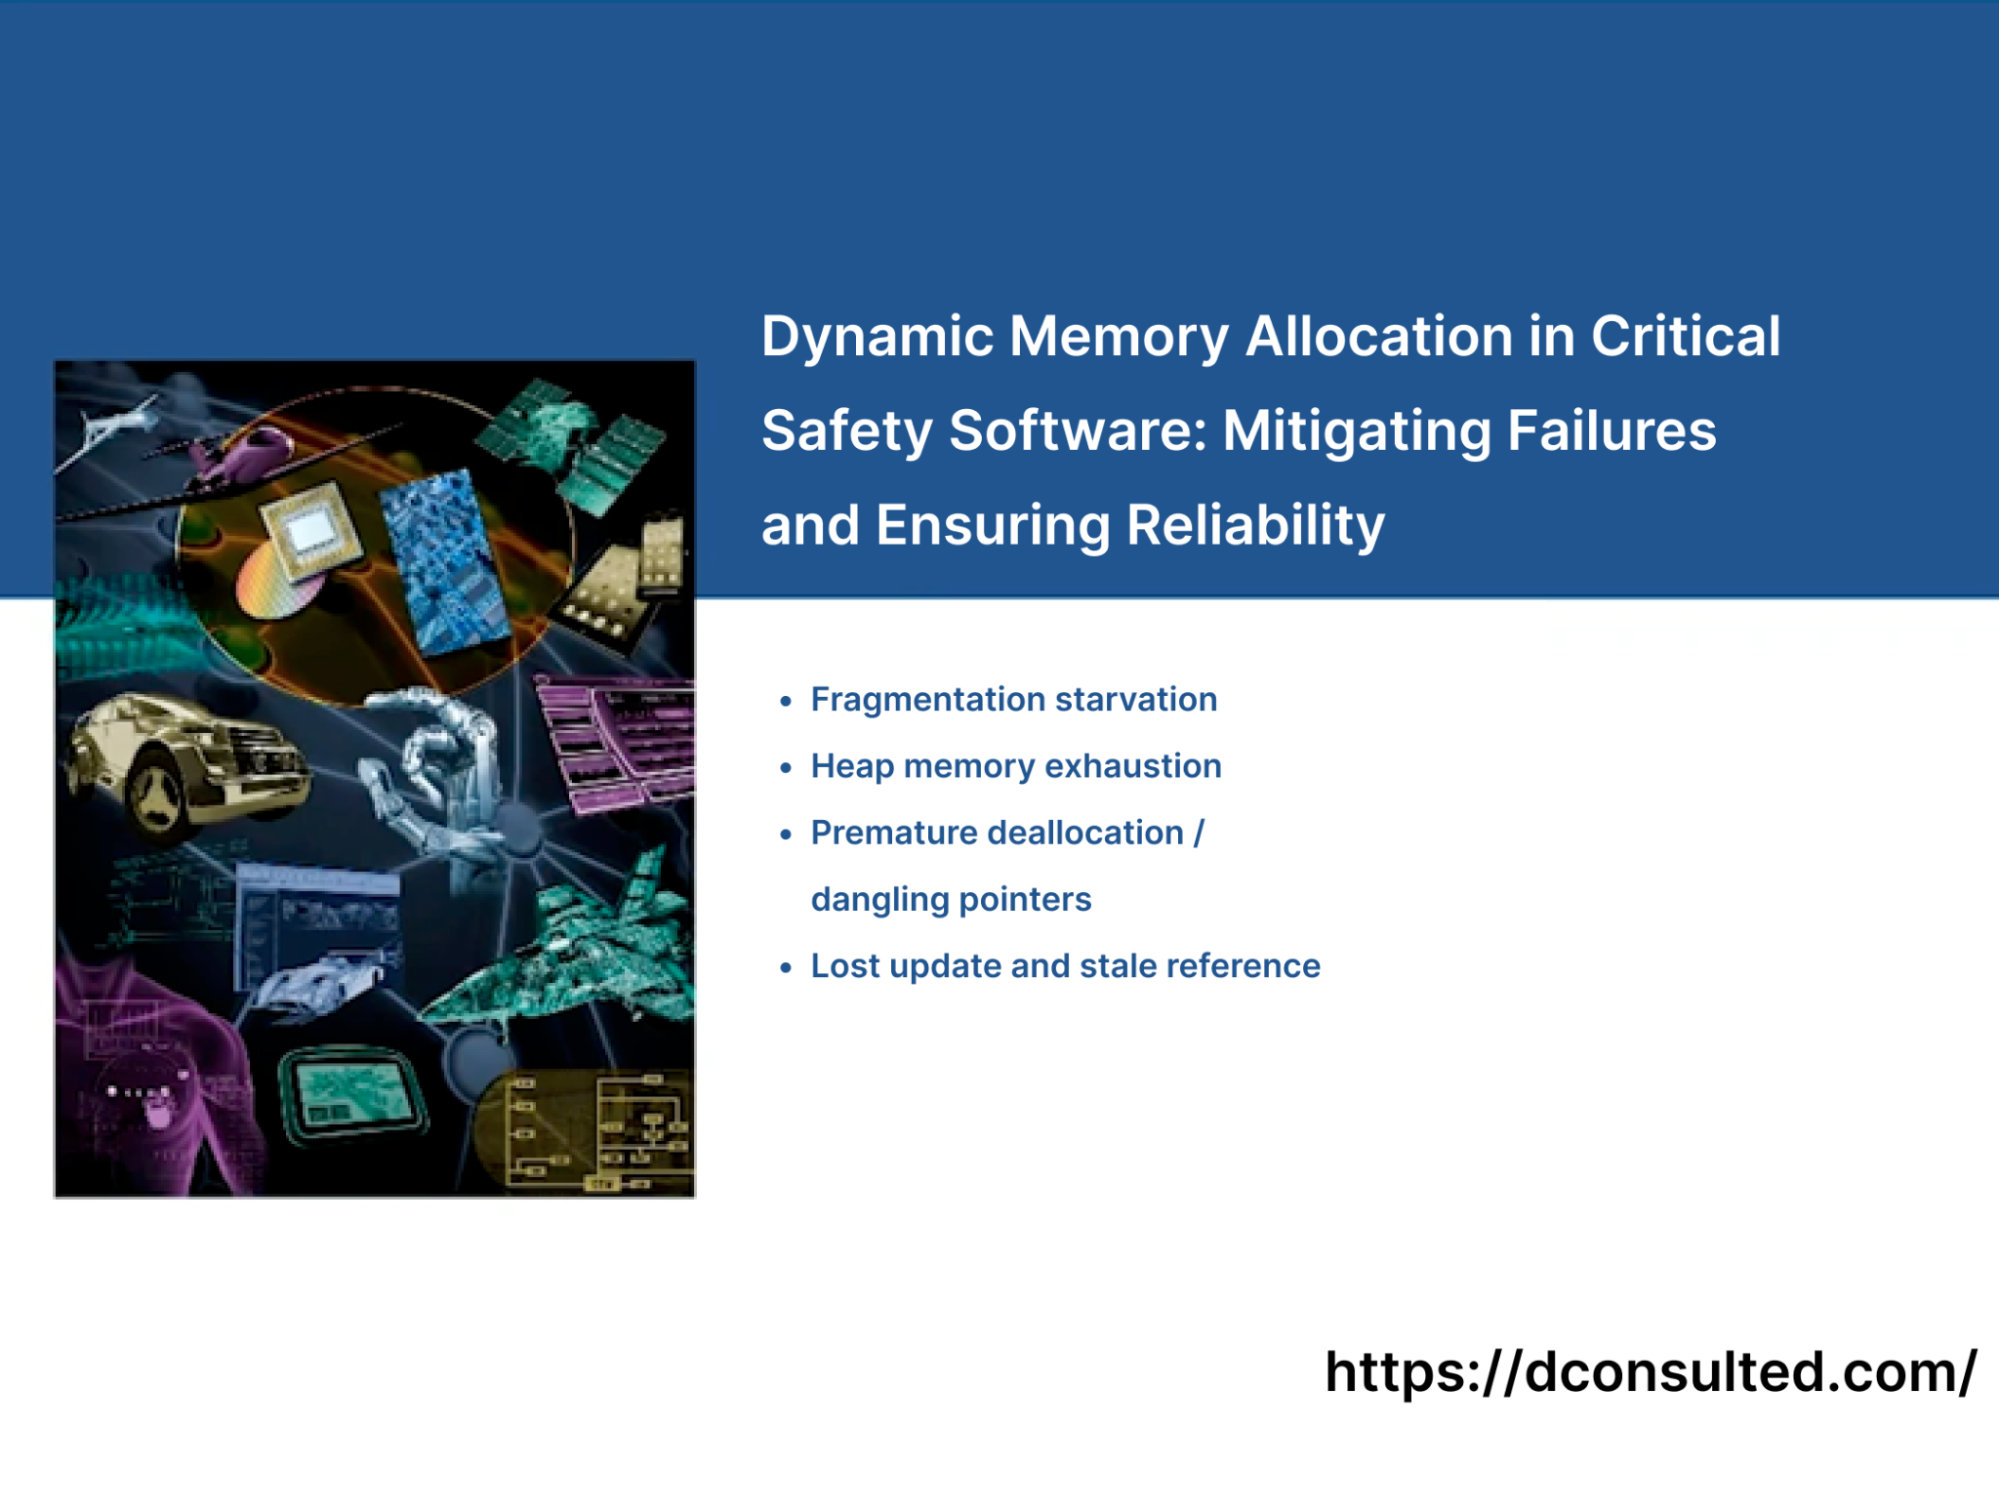 Dynamic Memory Allocation in Safety